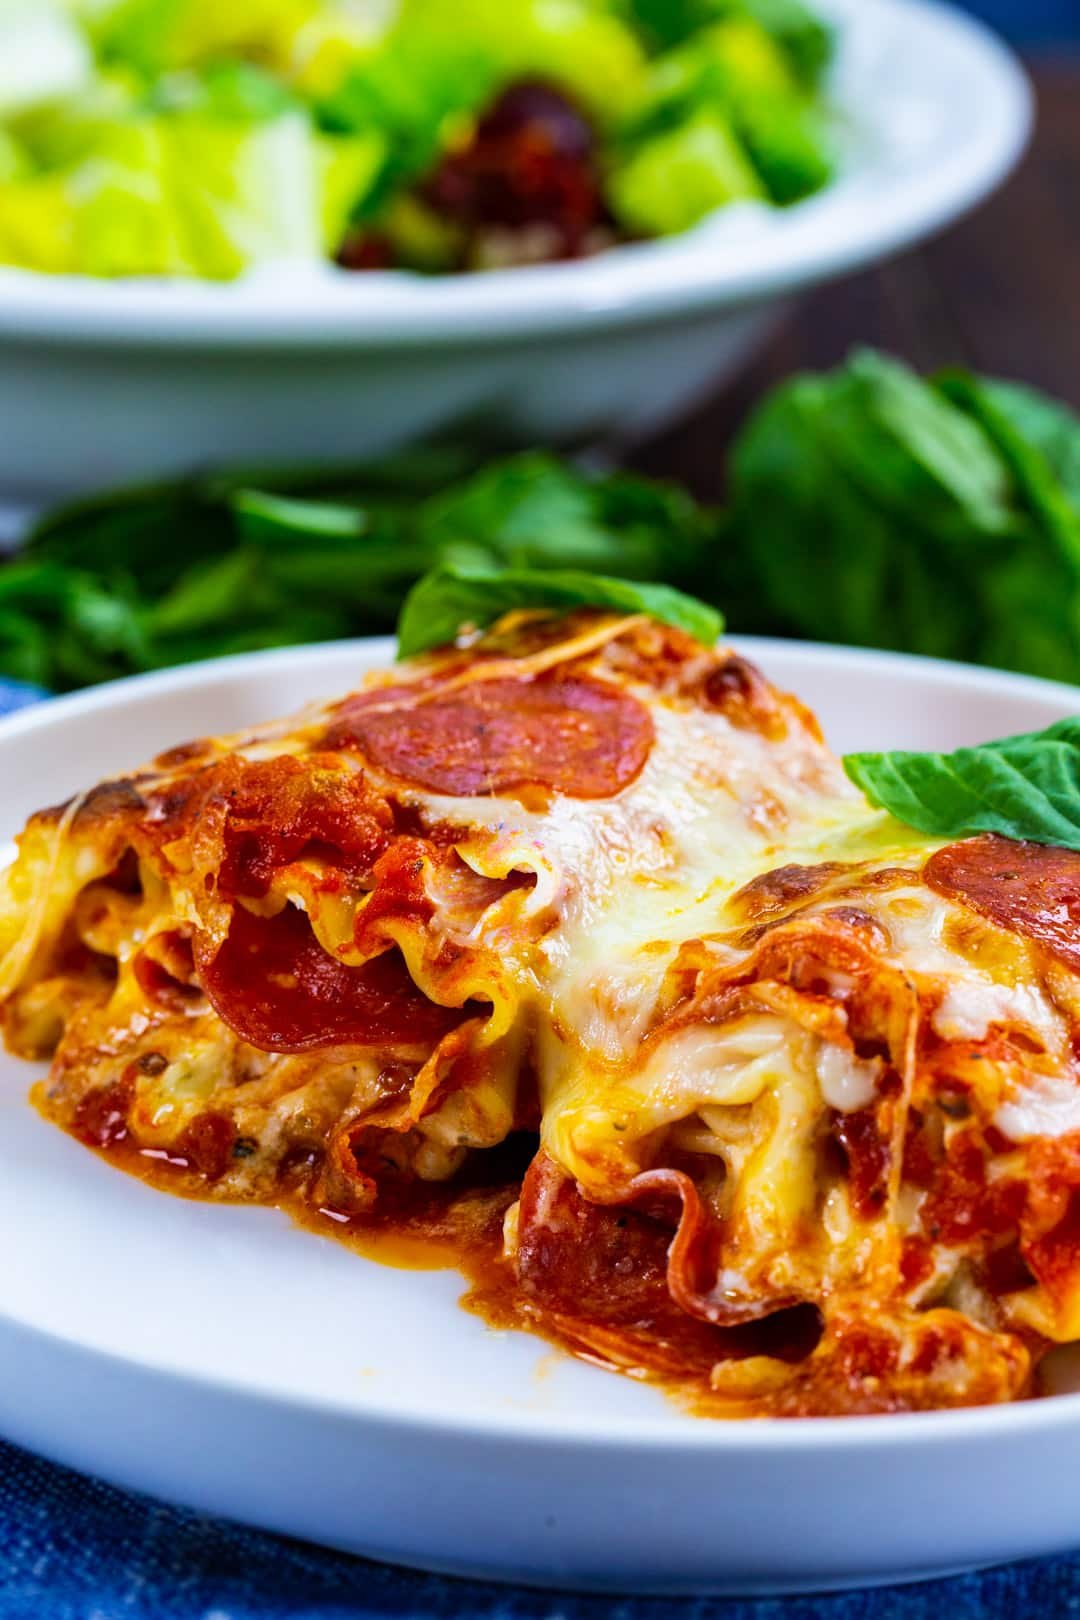 Two Lasagna Roll-Ups on a plate.